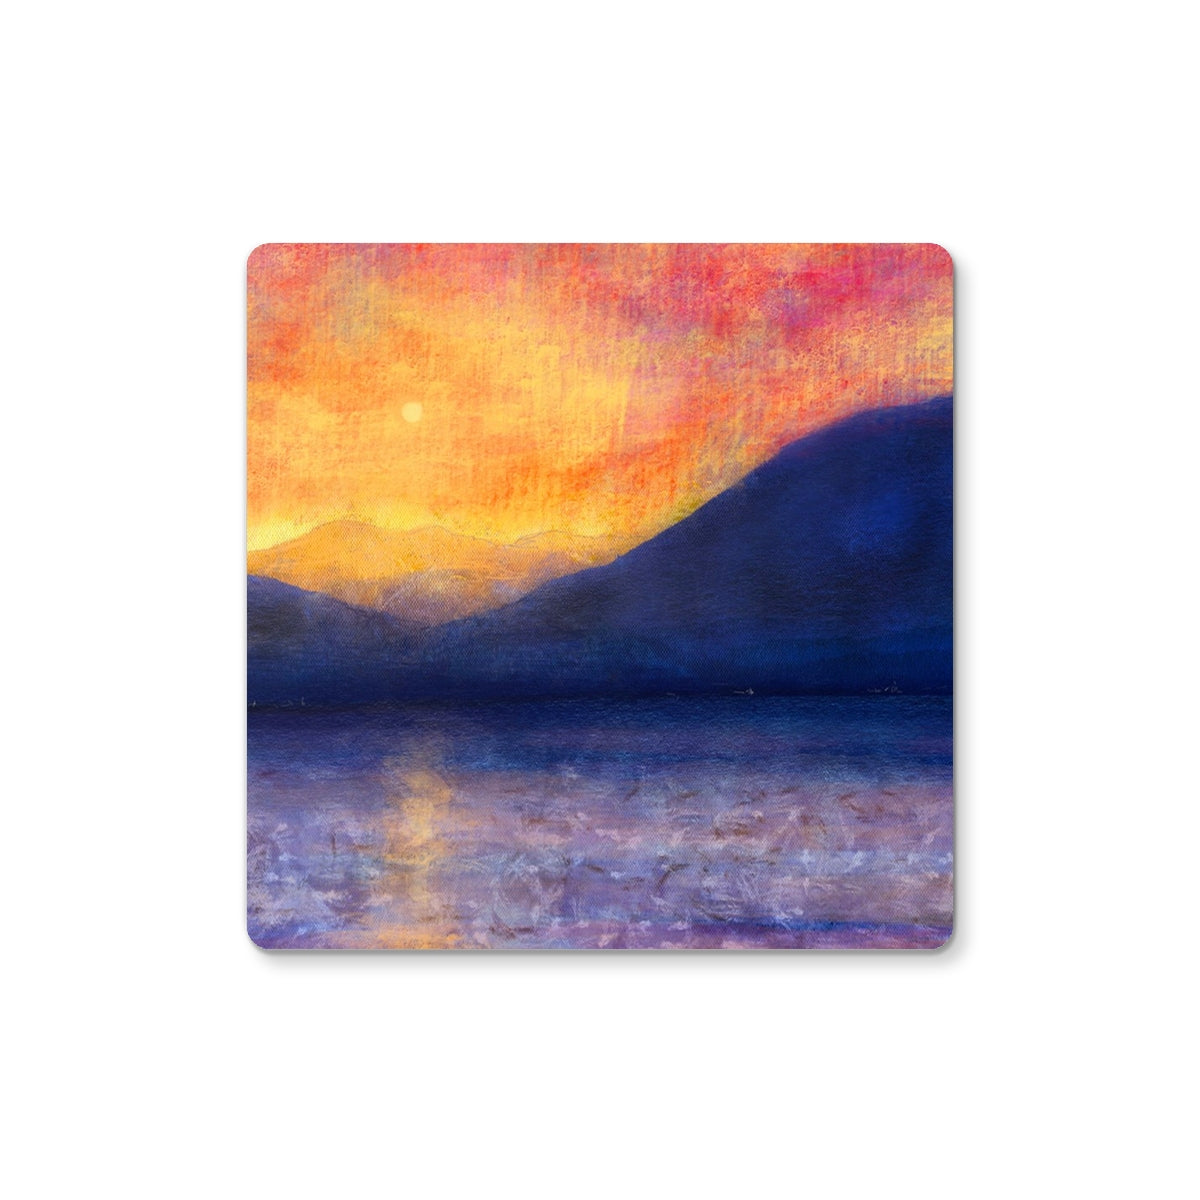 Sunset Approaching Mull Art Gifts Coaster-Coasters-Hebridean Islands Art Gallery-2 Coasters-Paintings, Prints, Homeware, Art Gifts From Scotland By Scottish Artist Kevin Hunter